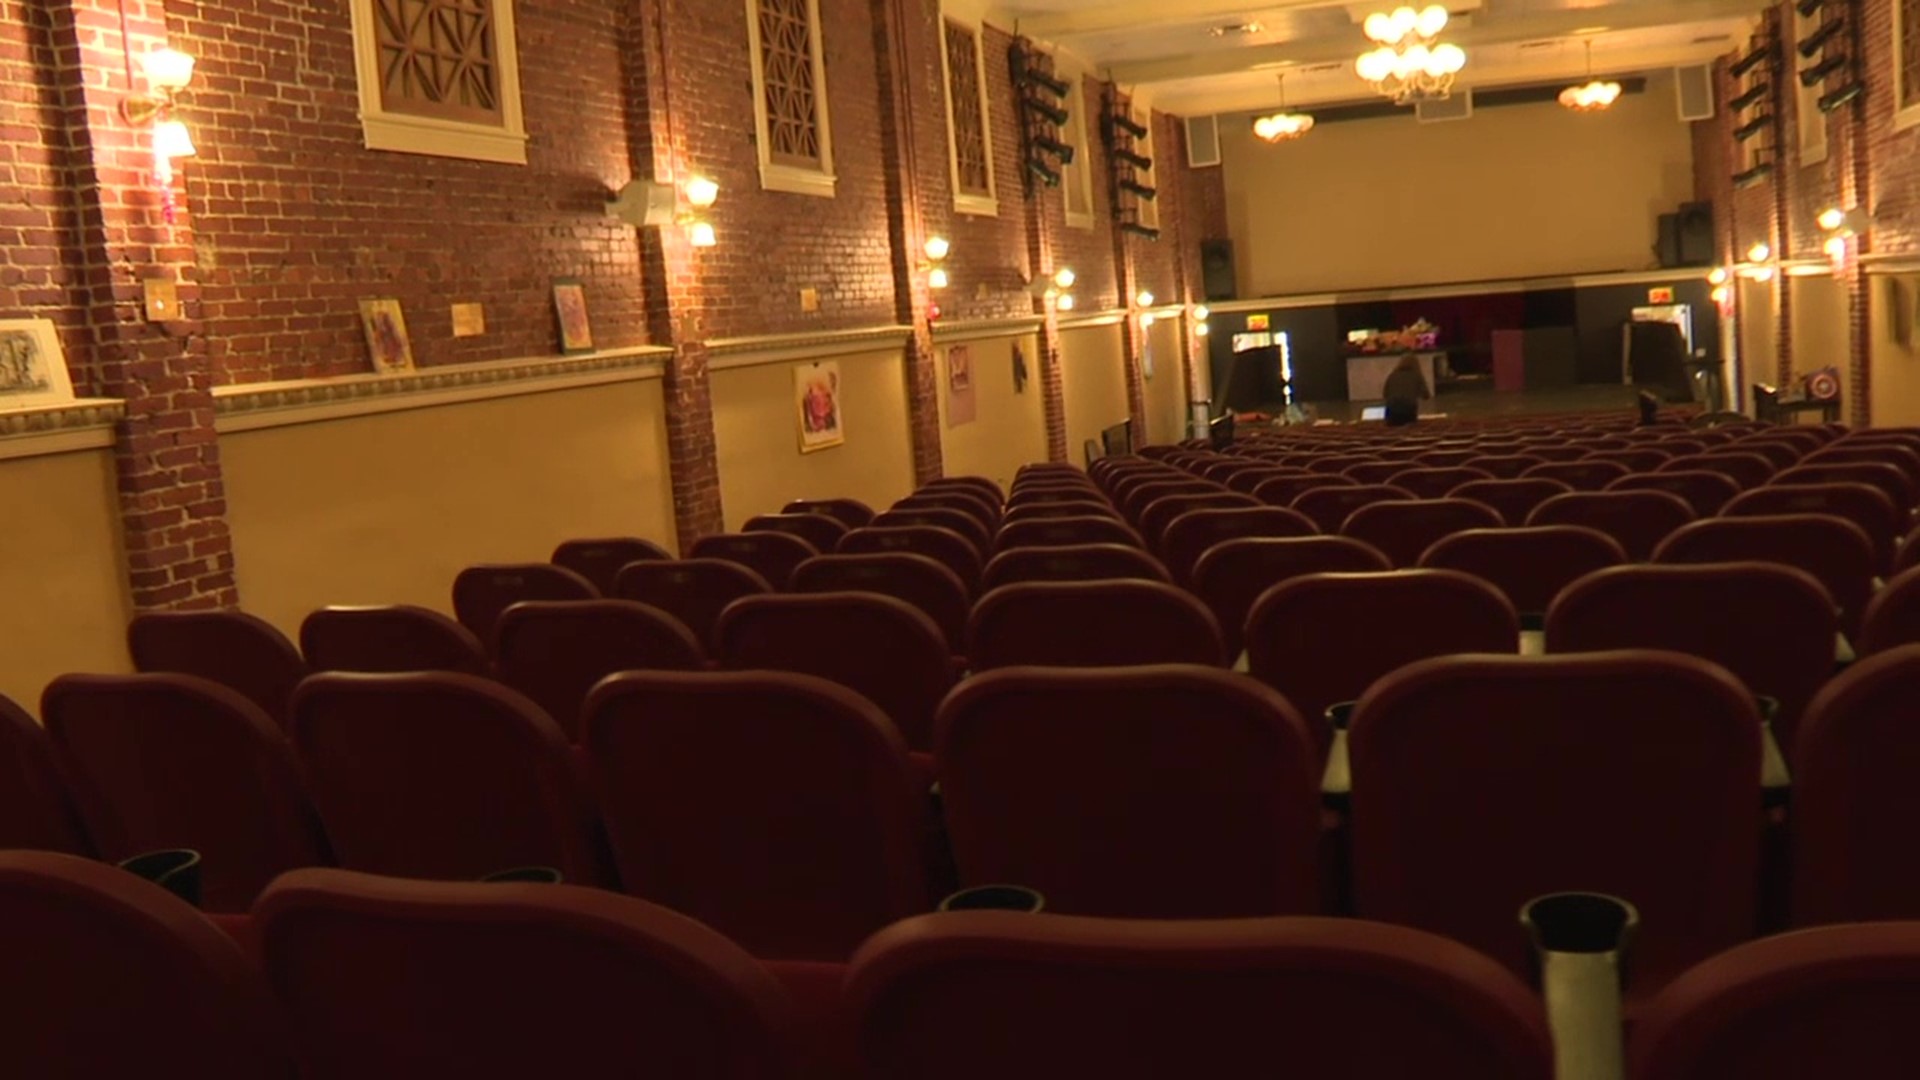 For the last several months, the seats inside Majestic Theater in Pottsville have remained empty because of the pandemic.